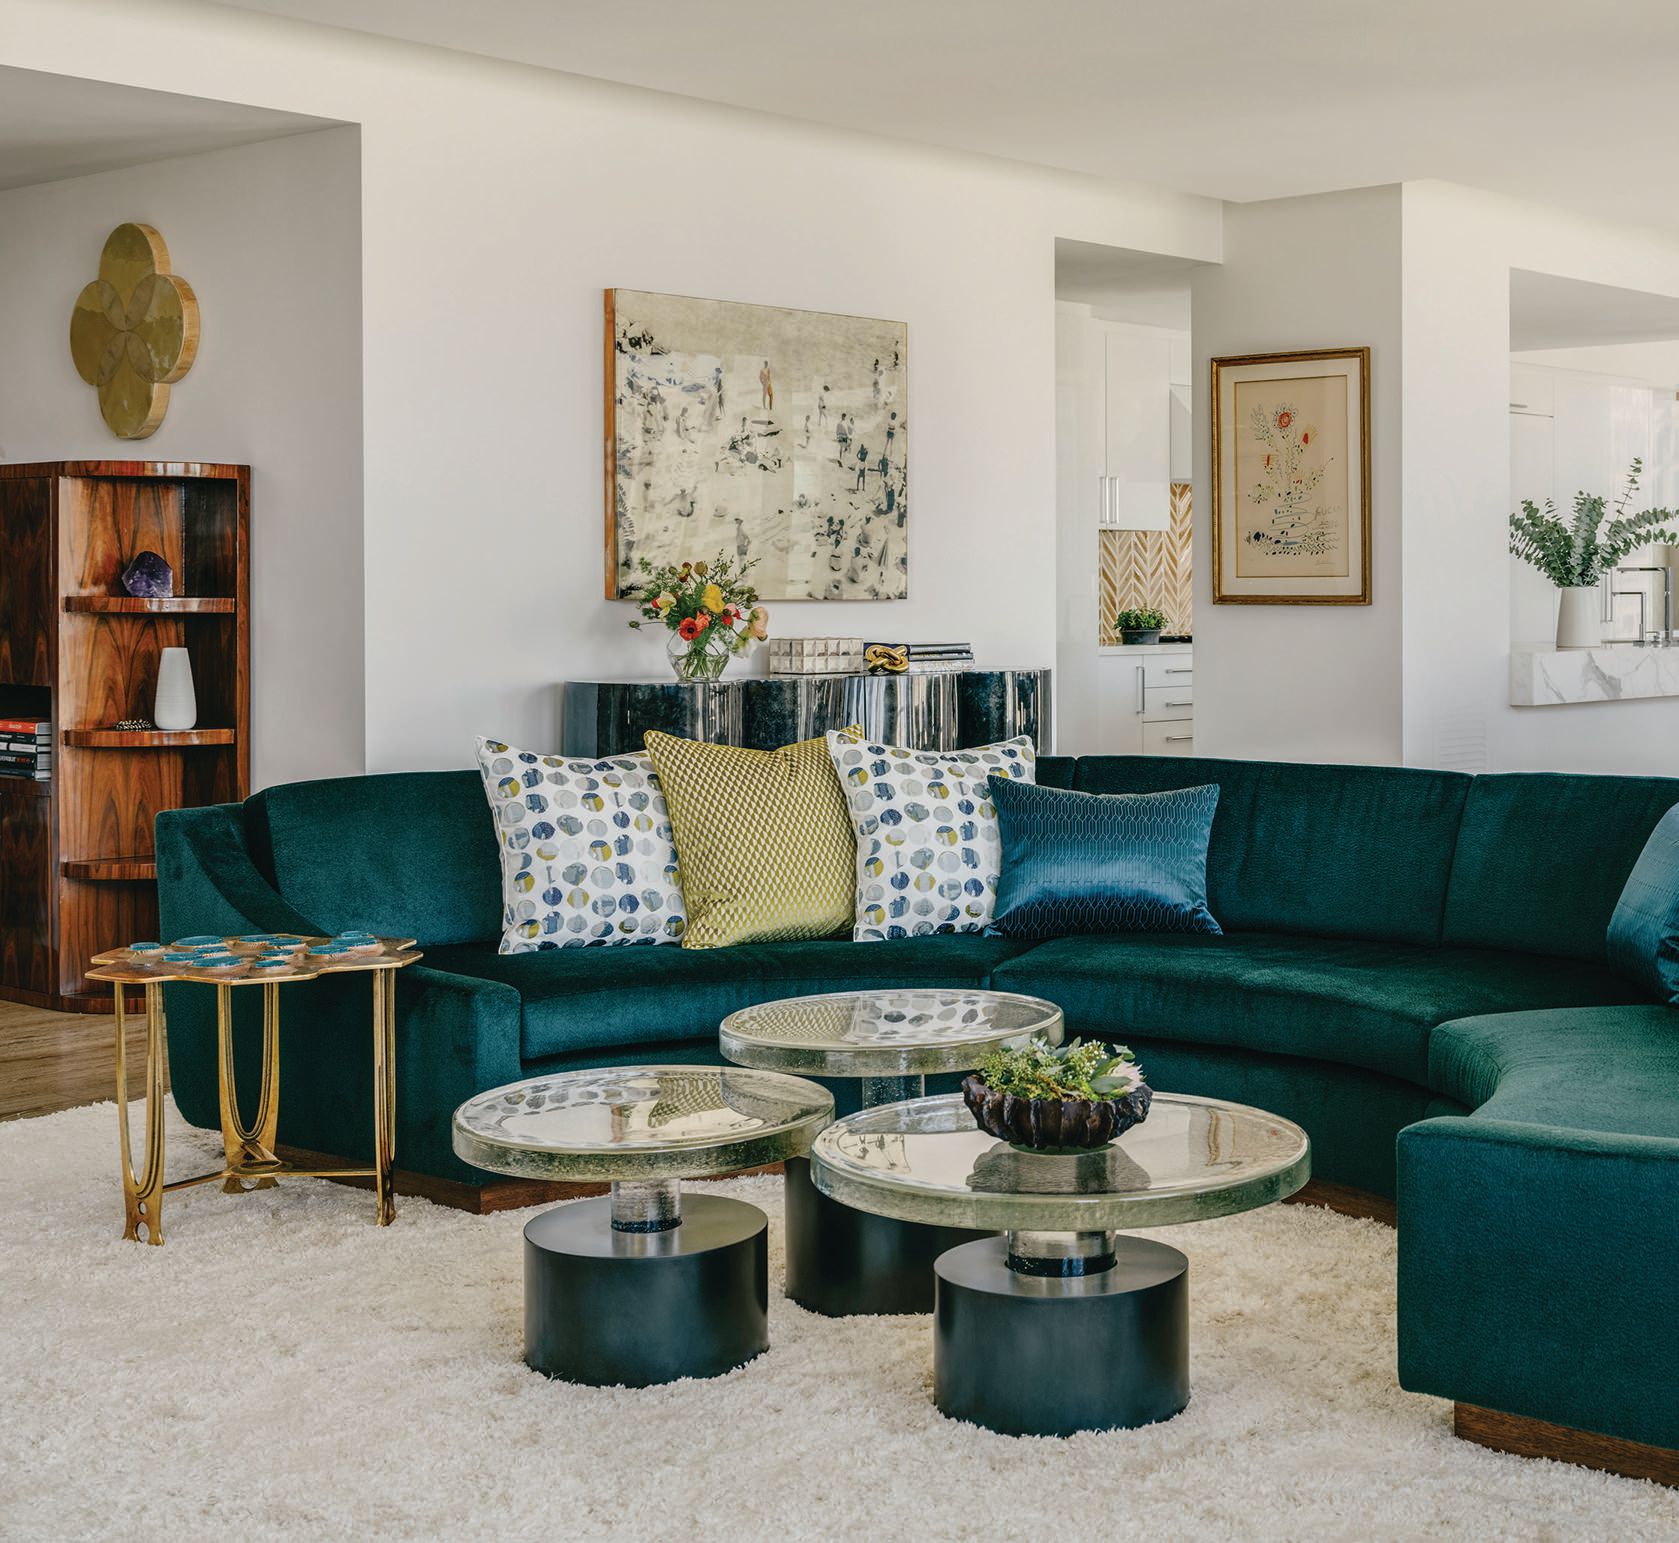 A custom-designed, curved sofa was designed to fit the room perfectly. PHOTOGRAPHED BY CHRISTOPHER STARK